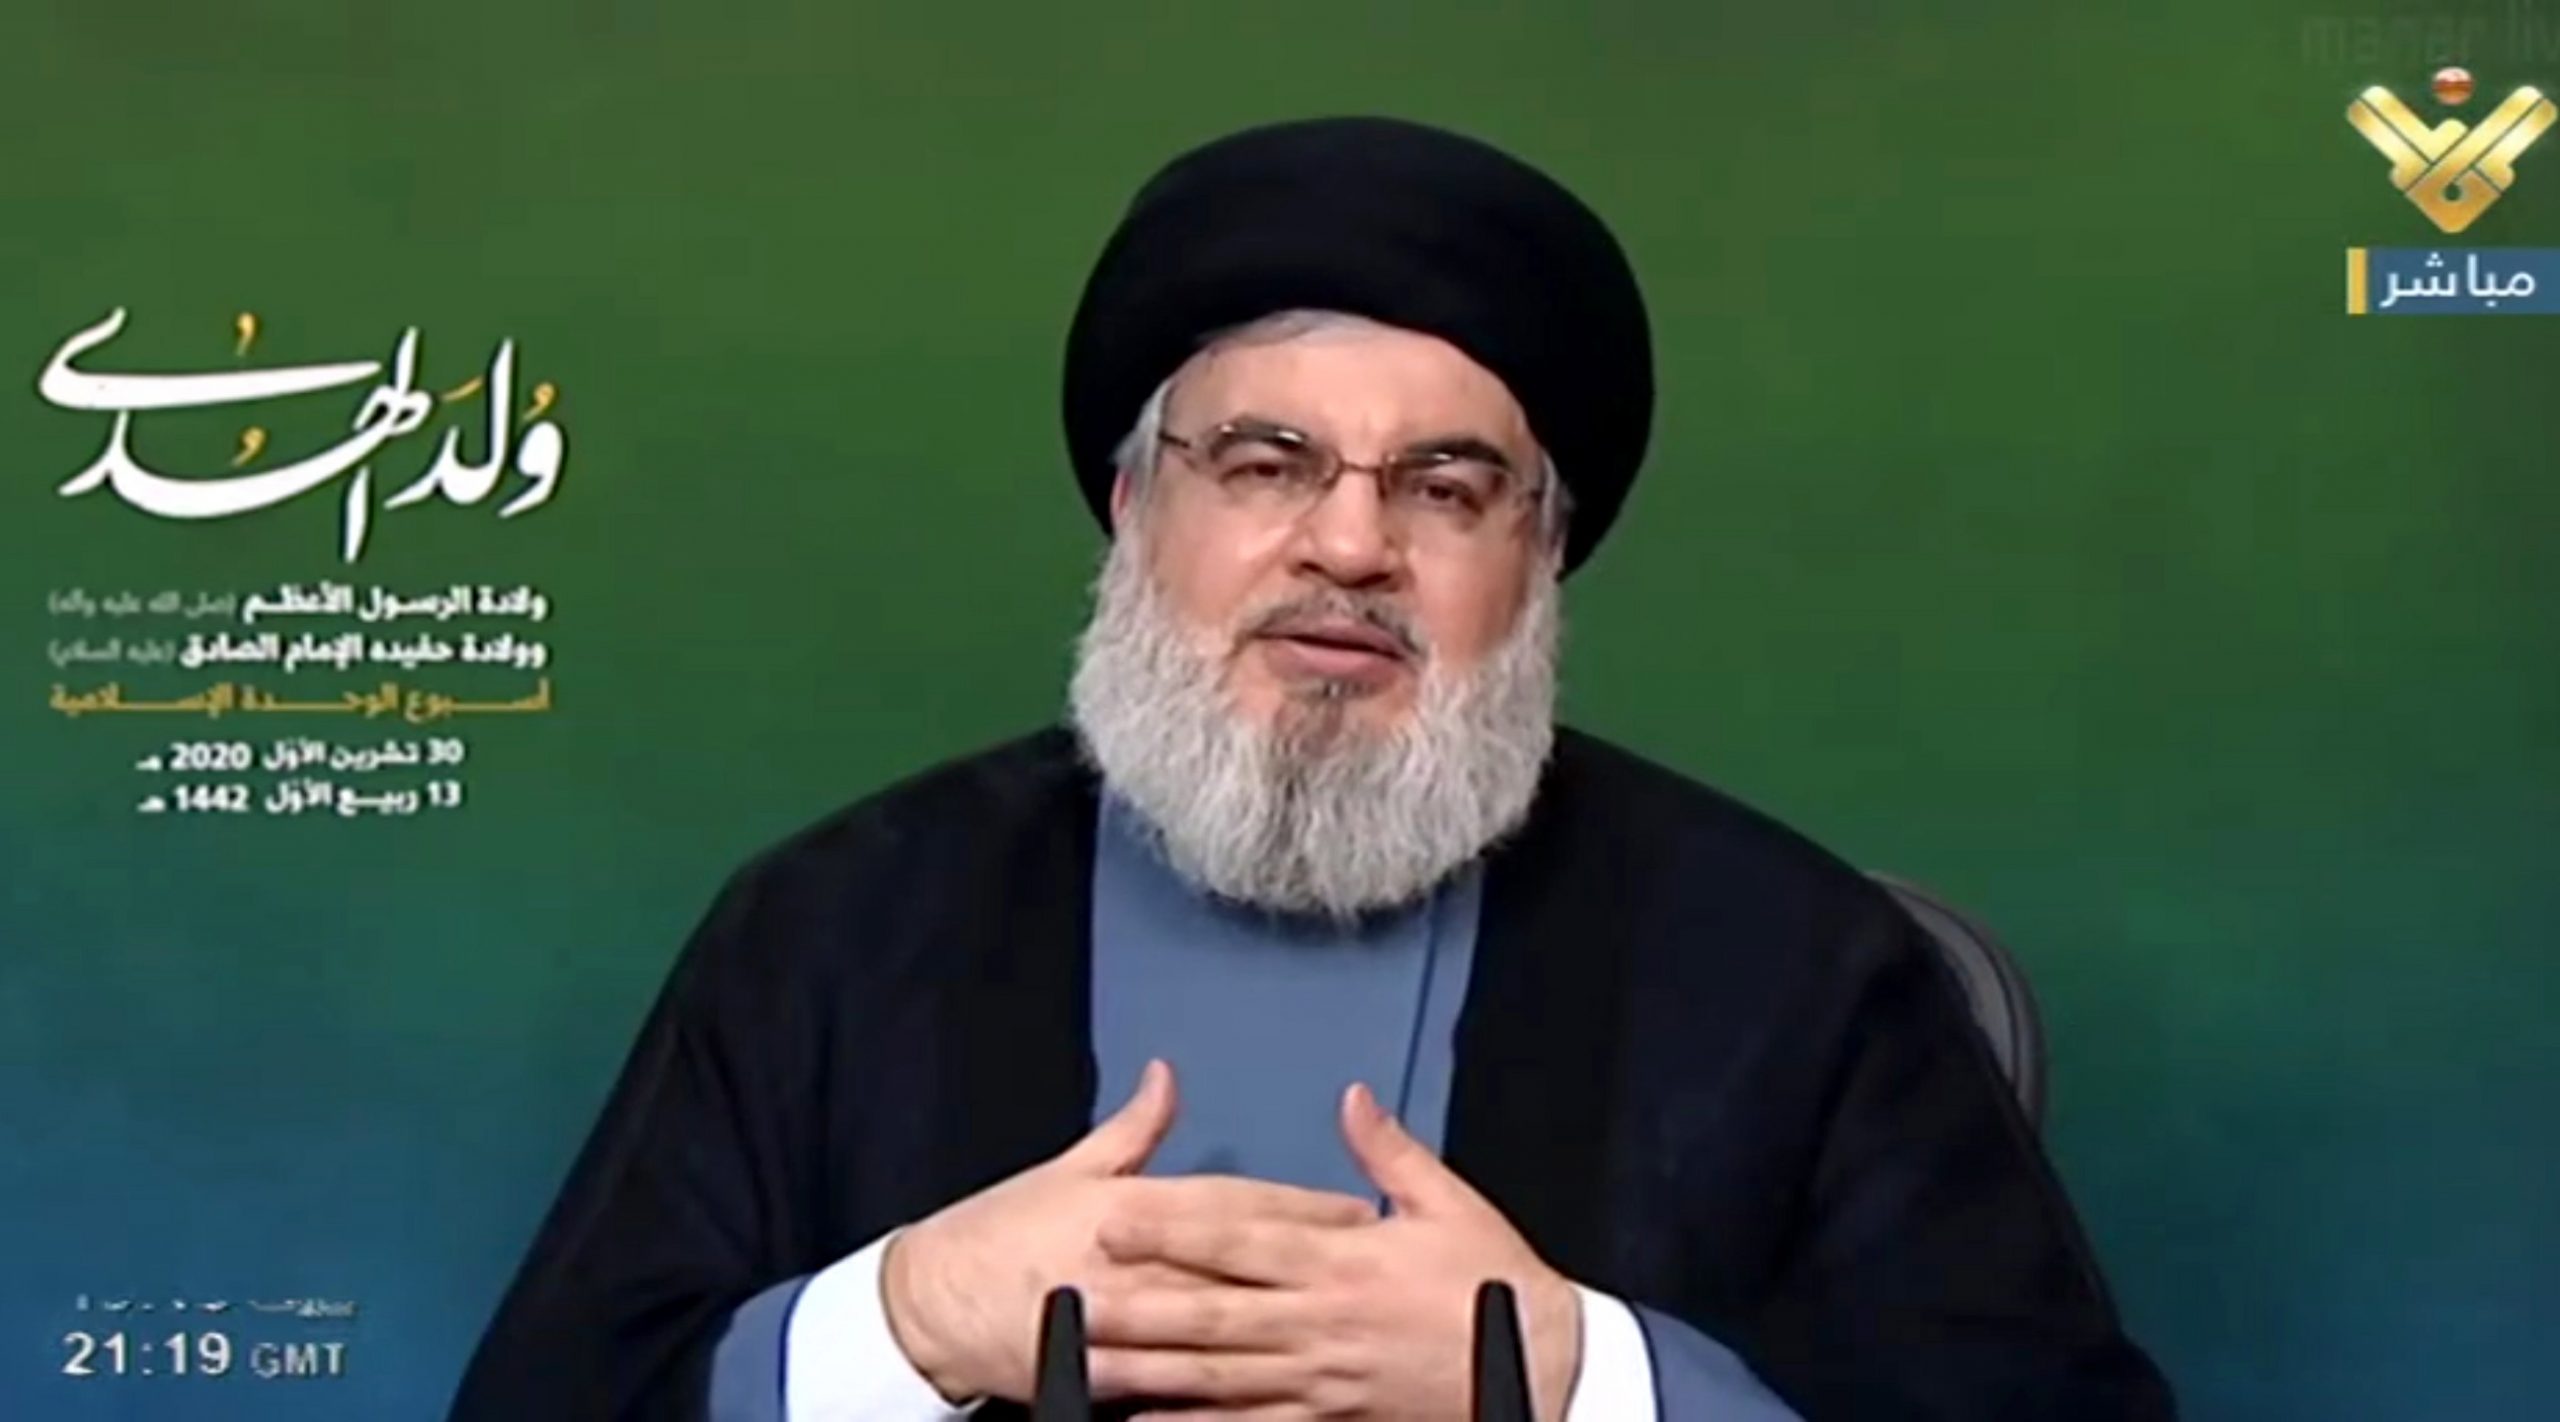 epa08786990 A handout frame grab photo made available by Hezbollah's al-Manar TV shows Hezbollah leader Sayyed Hassan Nasrallah giving a speech in Beirut, Lebanon, 30 October 2020. Secretary-General of Hezbollah, Sayyed Hassan Nasrallah delivered the speech on occasion of the birthday of the Prophet Muhammad, and then he spoke about the economic, financial and security situation in Lebanon, and stressed that a government must be formed quickly, in order to work to stop the crisis in the country. He denounced the murders that occurred at the hands of an extremist in France recently and said that Islam does not accept that, and denounced what was stated in the statement of French President Macron.  EPA/AL-MANAR TV / HANDOUT  HANDOUT EDITORIAL USE ONLY/NO SALES